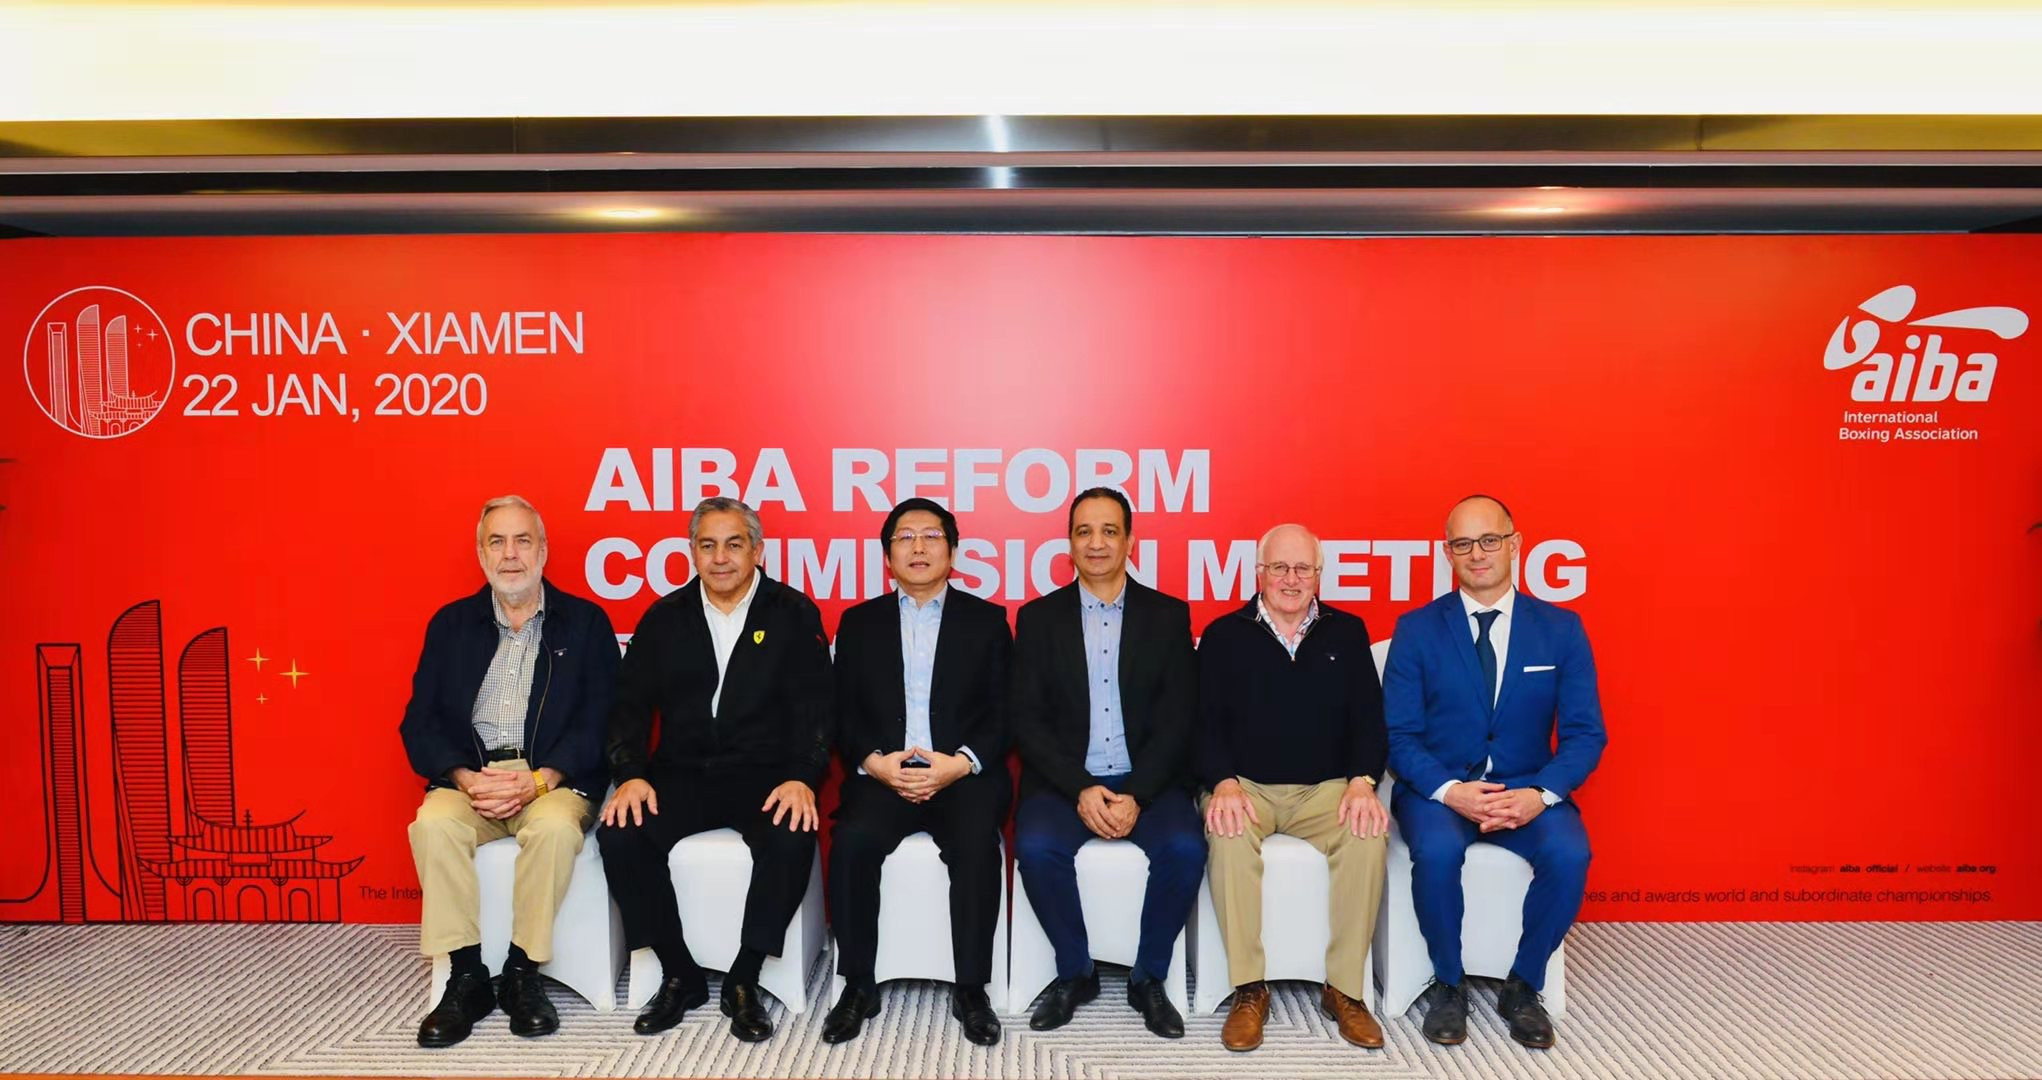 Governance reforms are viewed as key to the future of AIBA ©AIBA